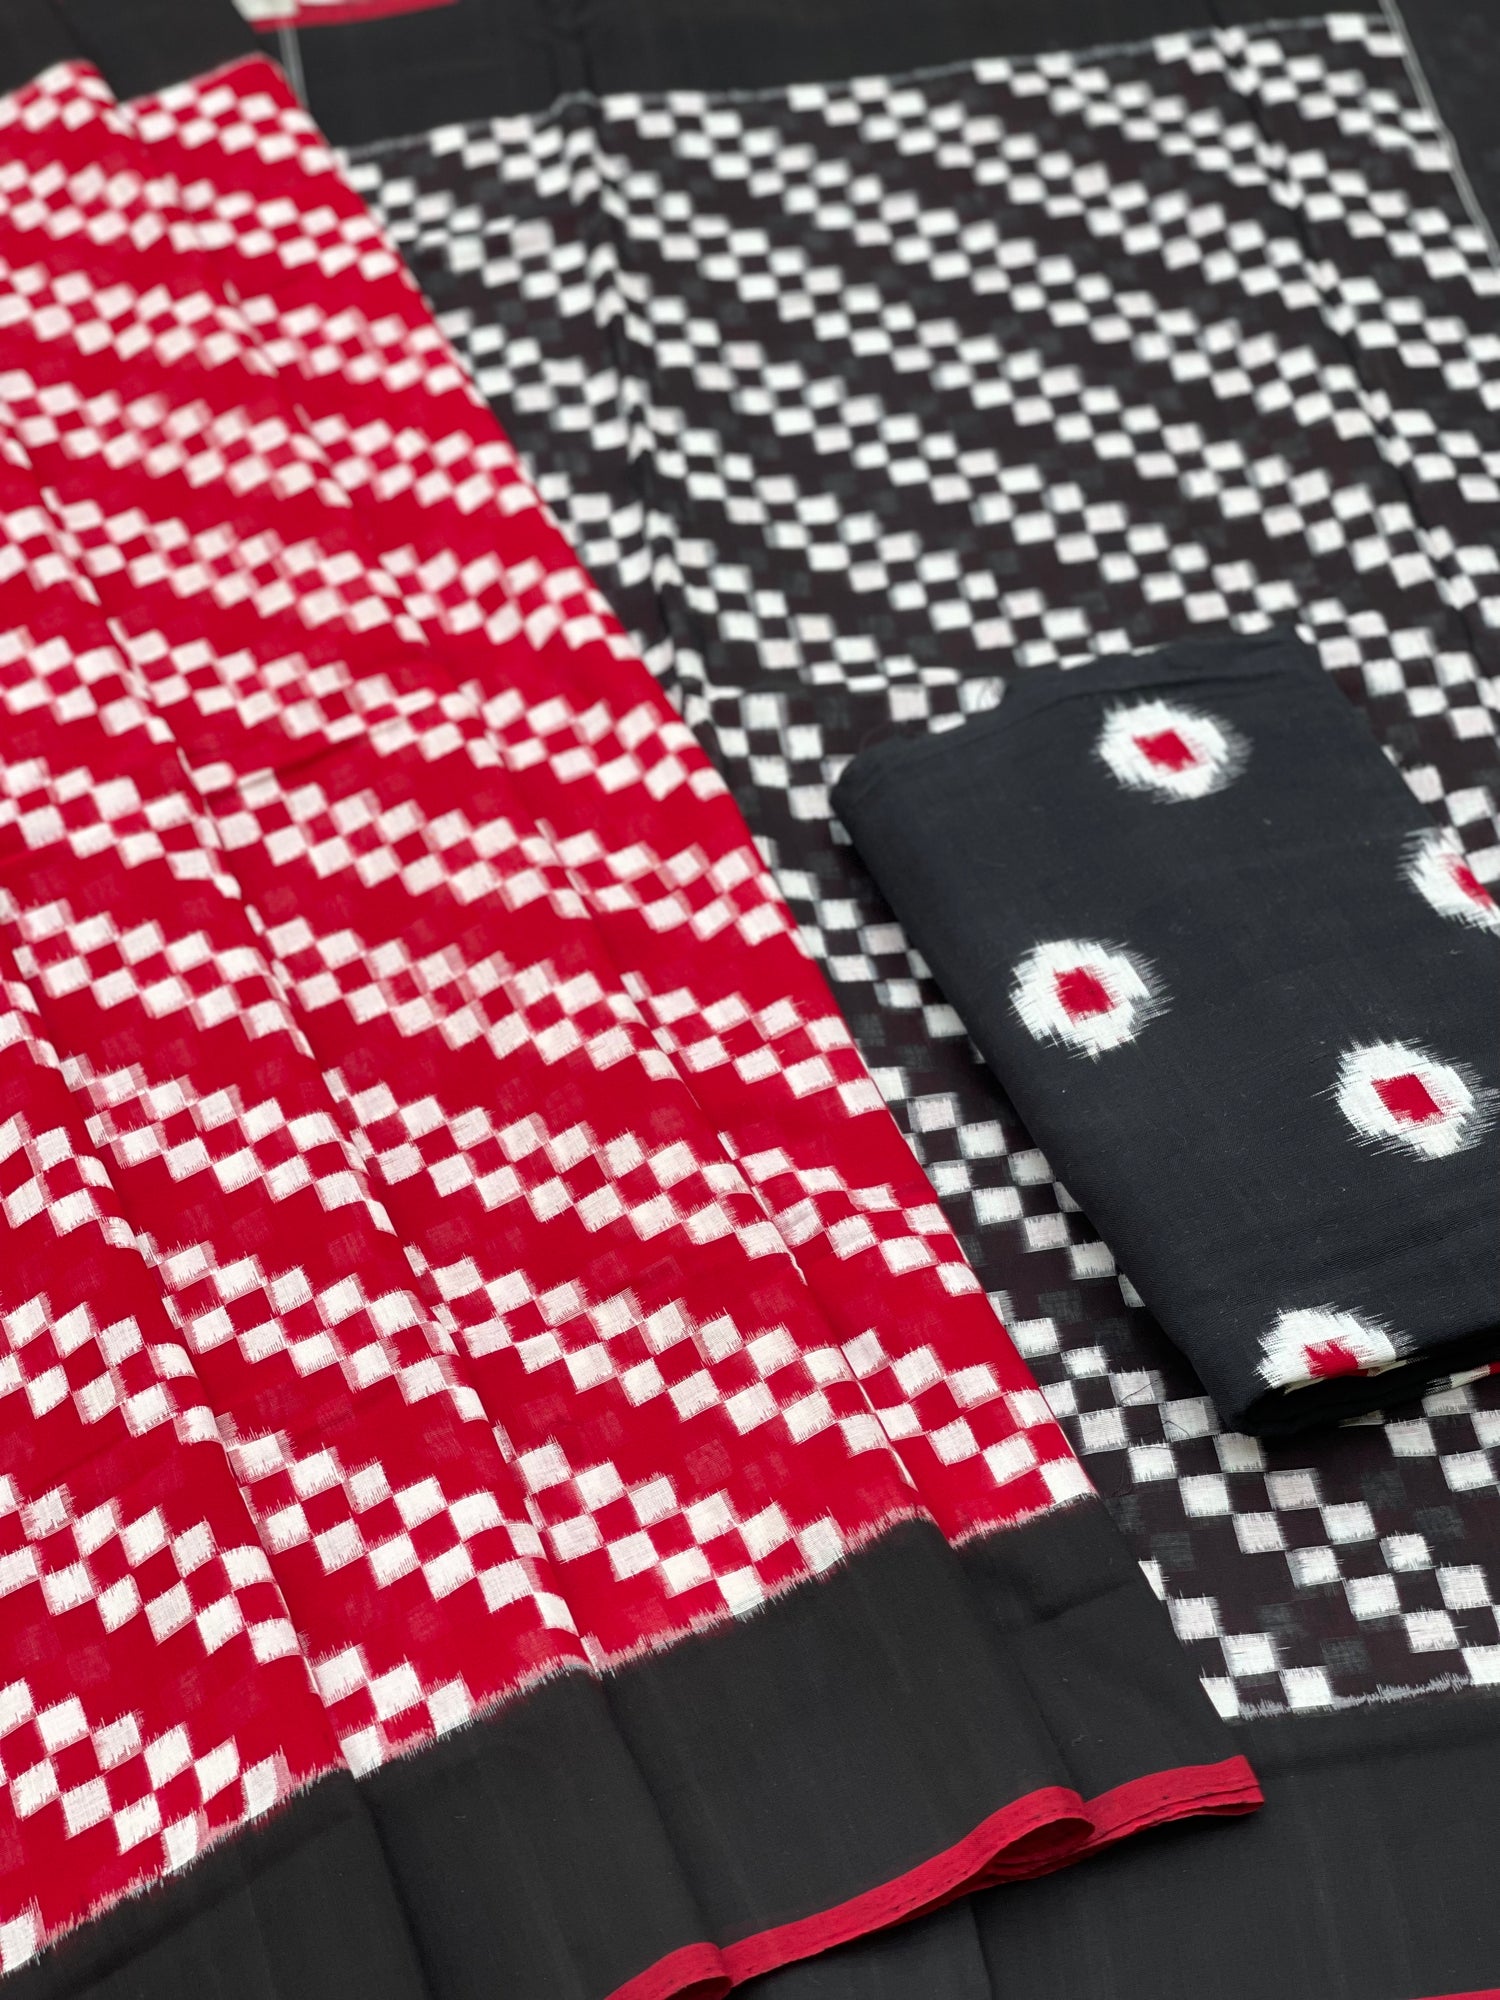 Double Ikkat cotton saree in Red and Black rhombus pattern